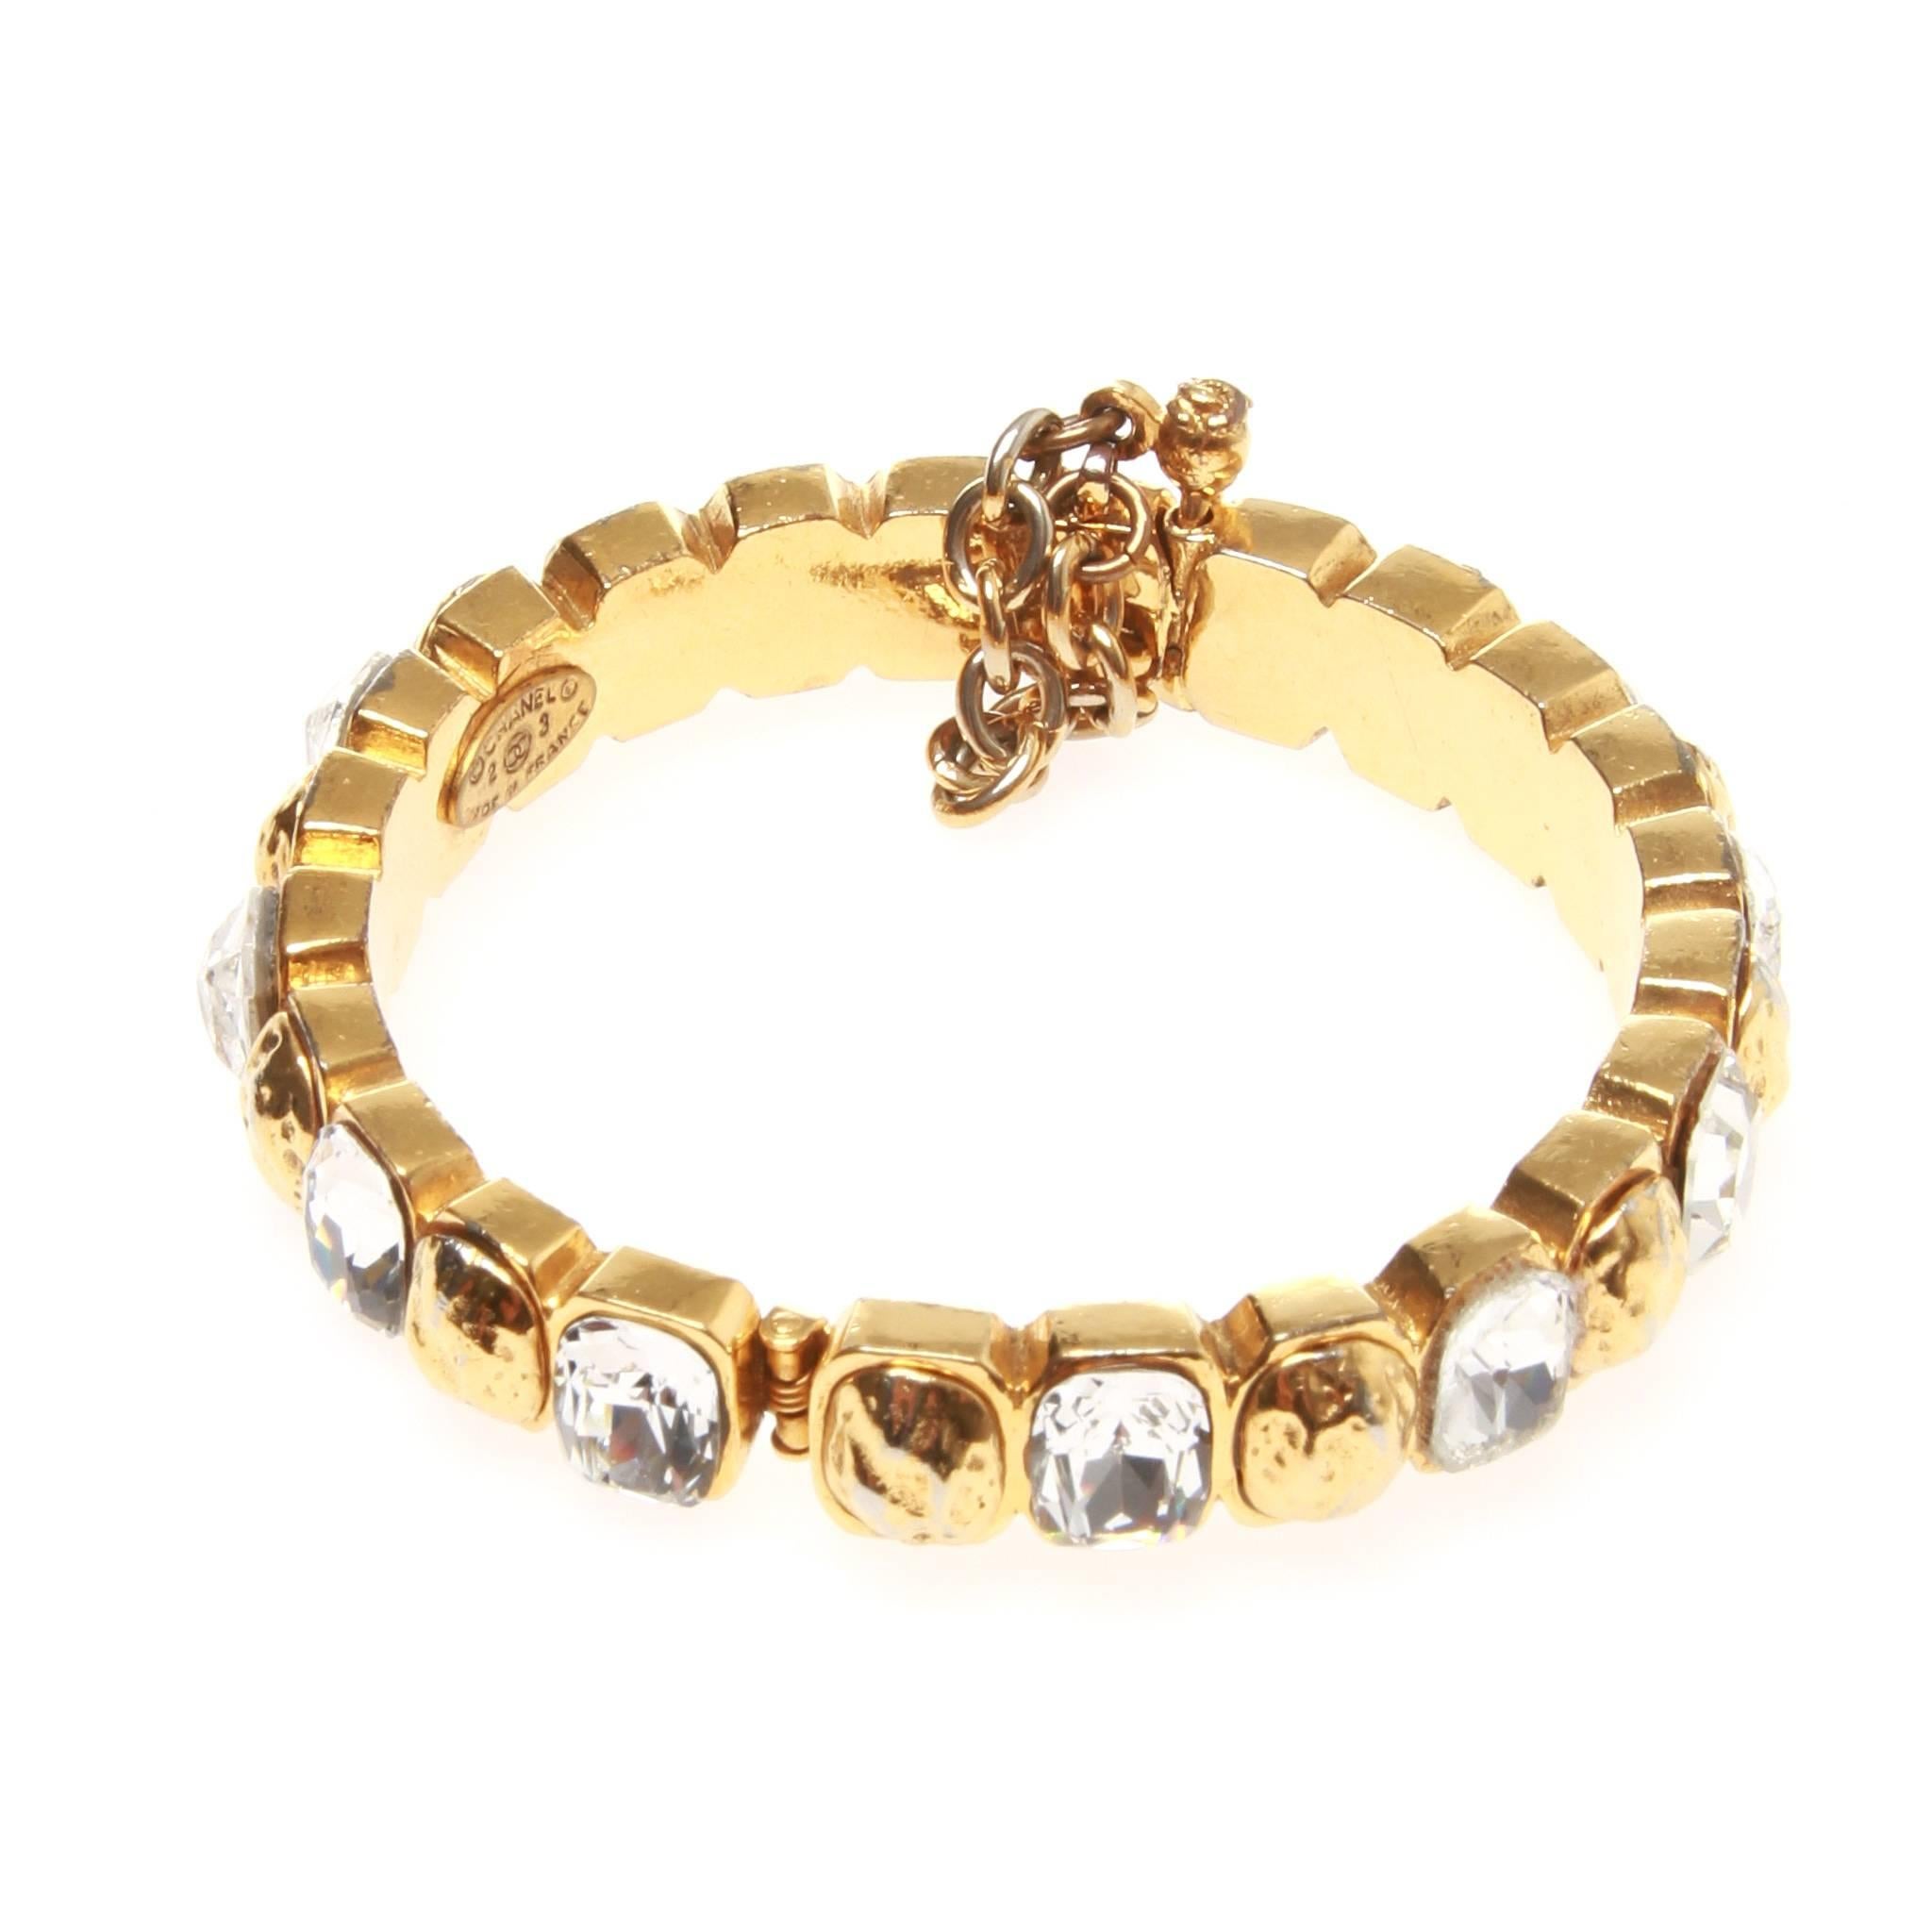 Vintage Chanel bracelet in gold-tone metal featuring a band of alternating gold metal and Swarovski crystal. Hinged mechanism with pin fastening. 

Stamped 2 3 - Collection 23 - c. late 80s